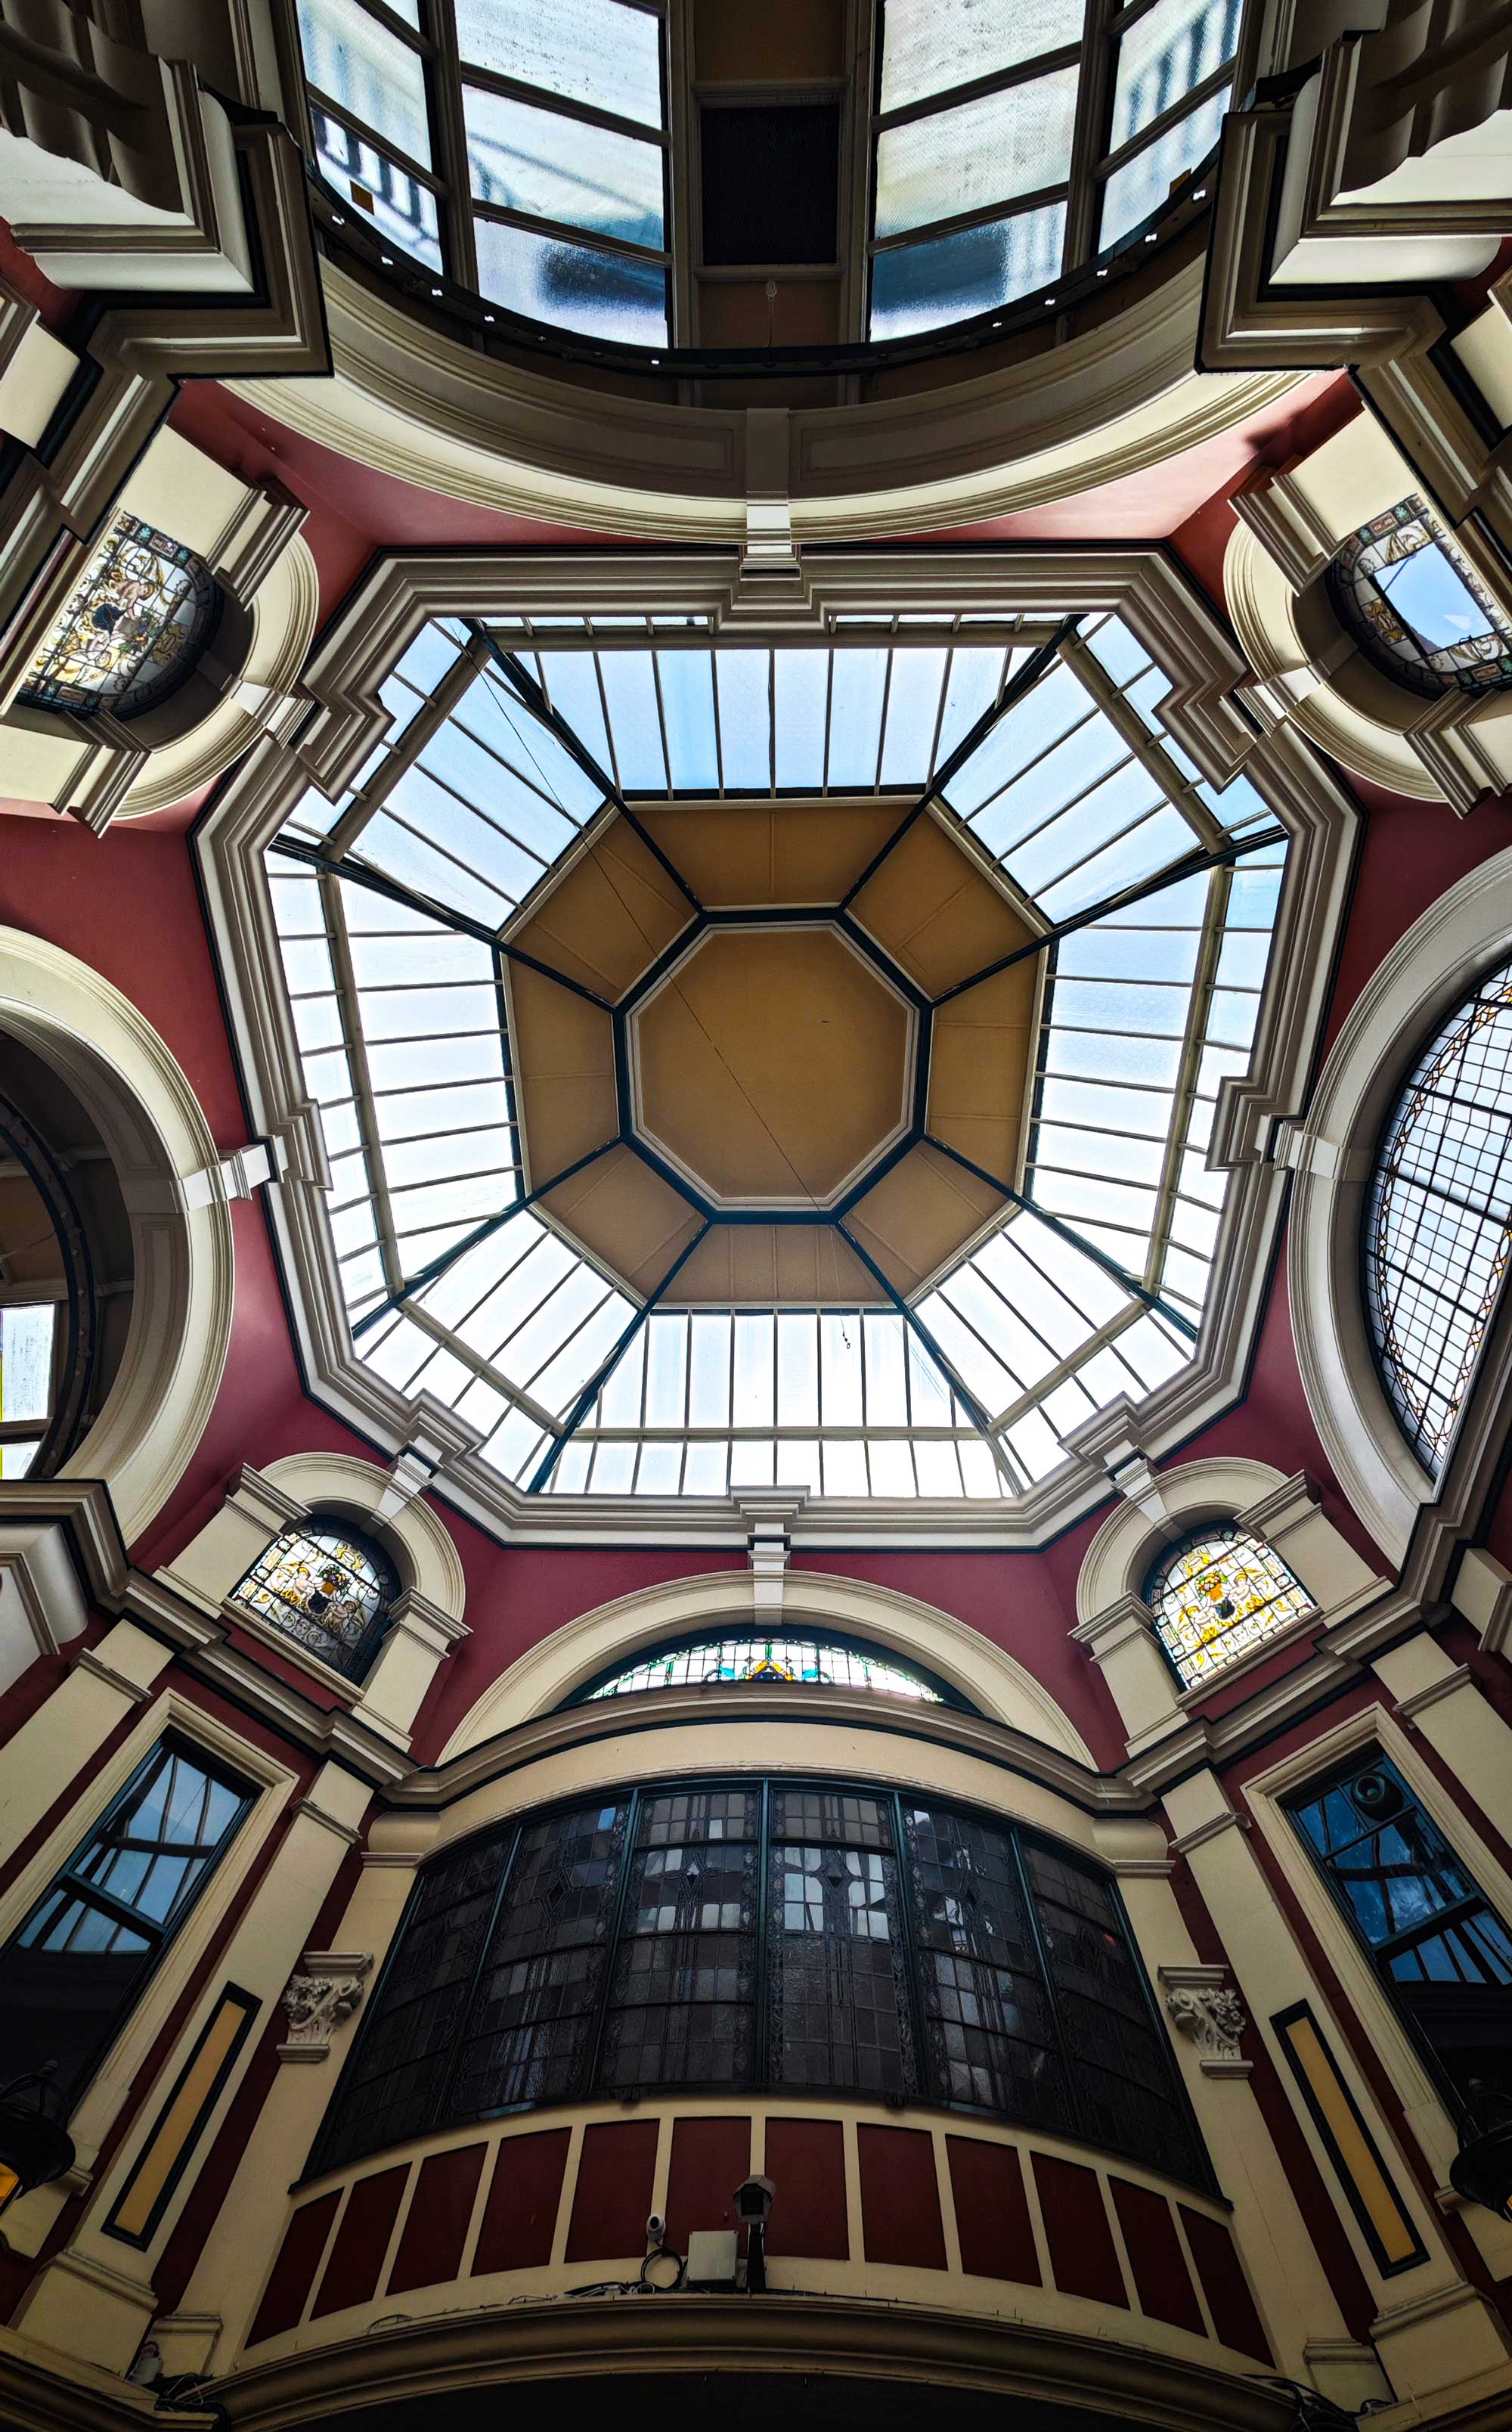 View looking up at an atrium roof